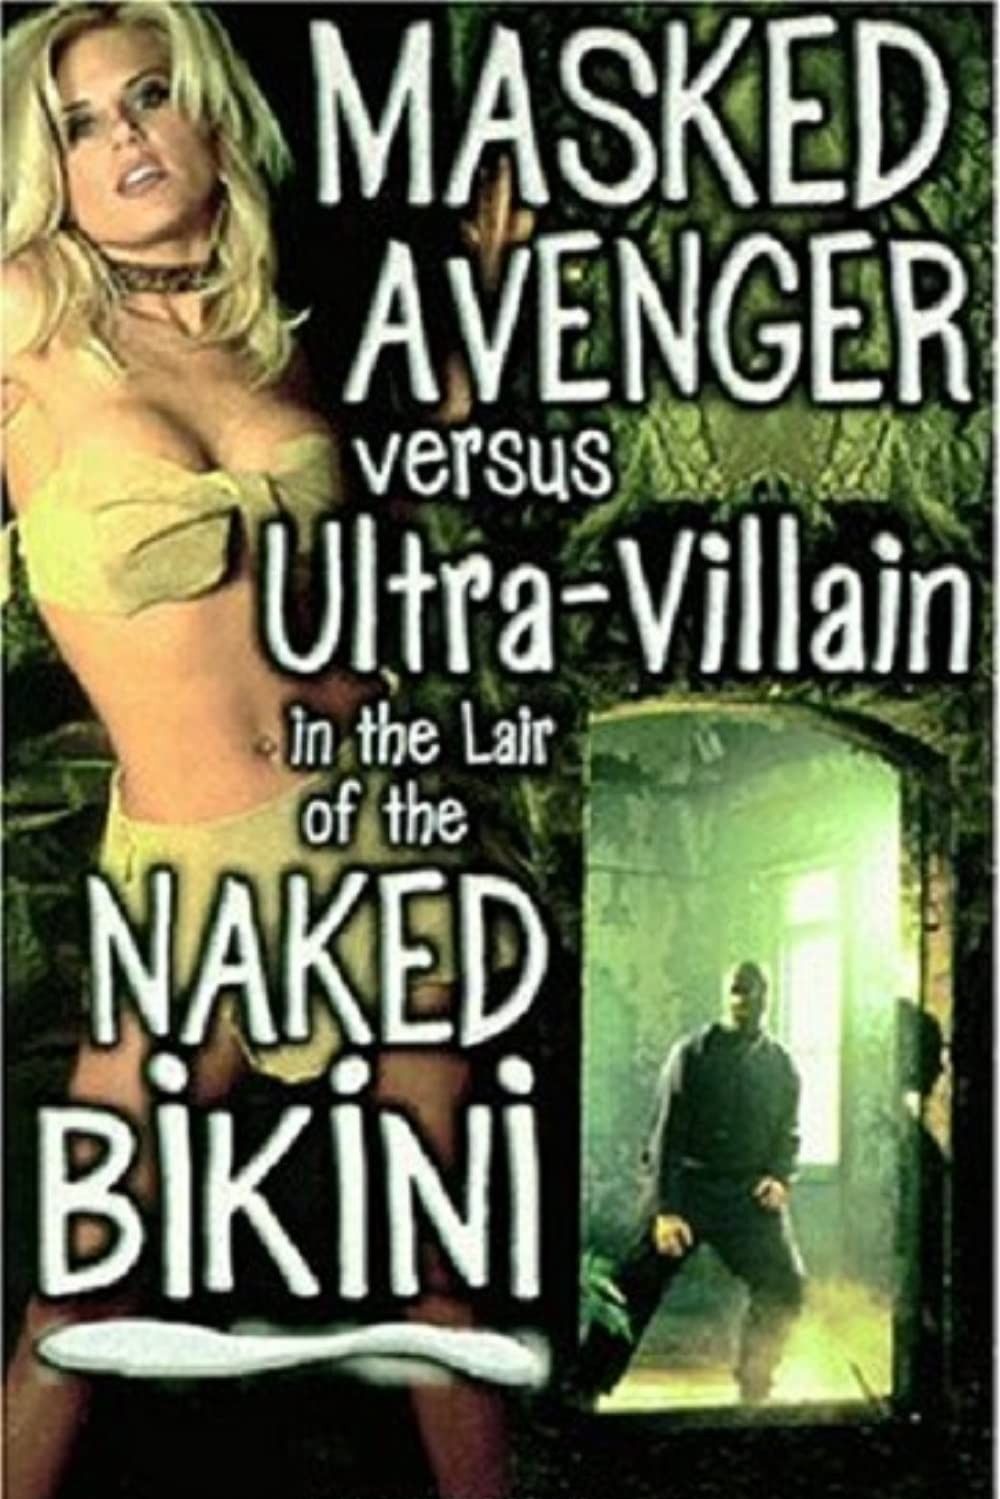 [18+] Masked Avenger Versus Ultra-Villain in the Lair of the Naked Bikini (2000) English BluRay download full movie